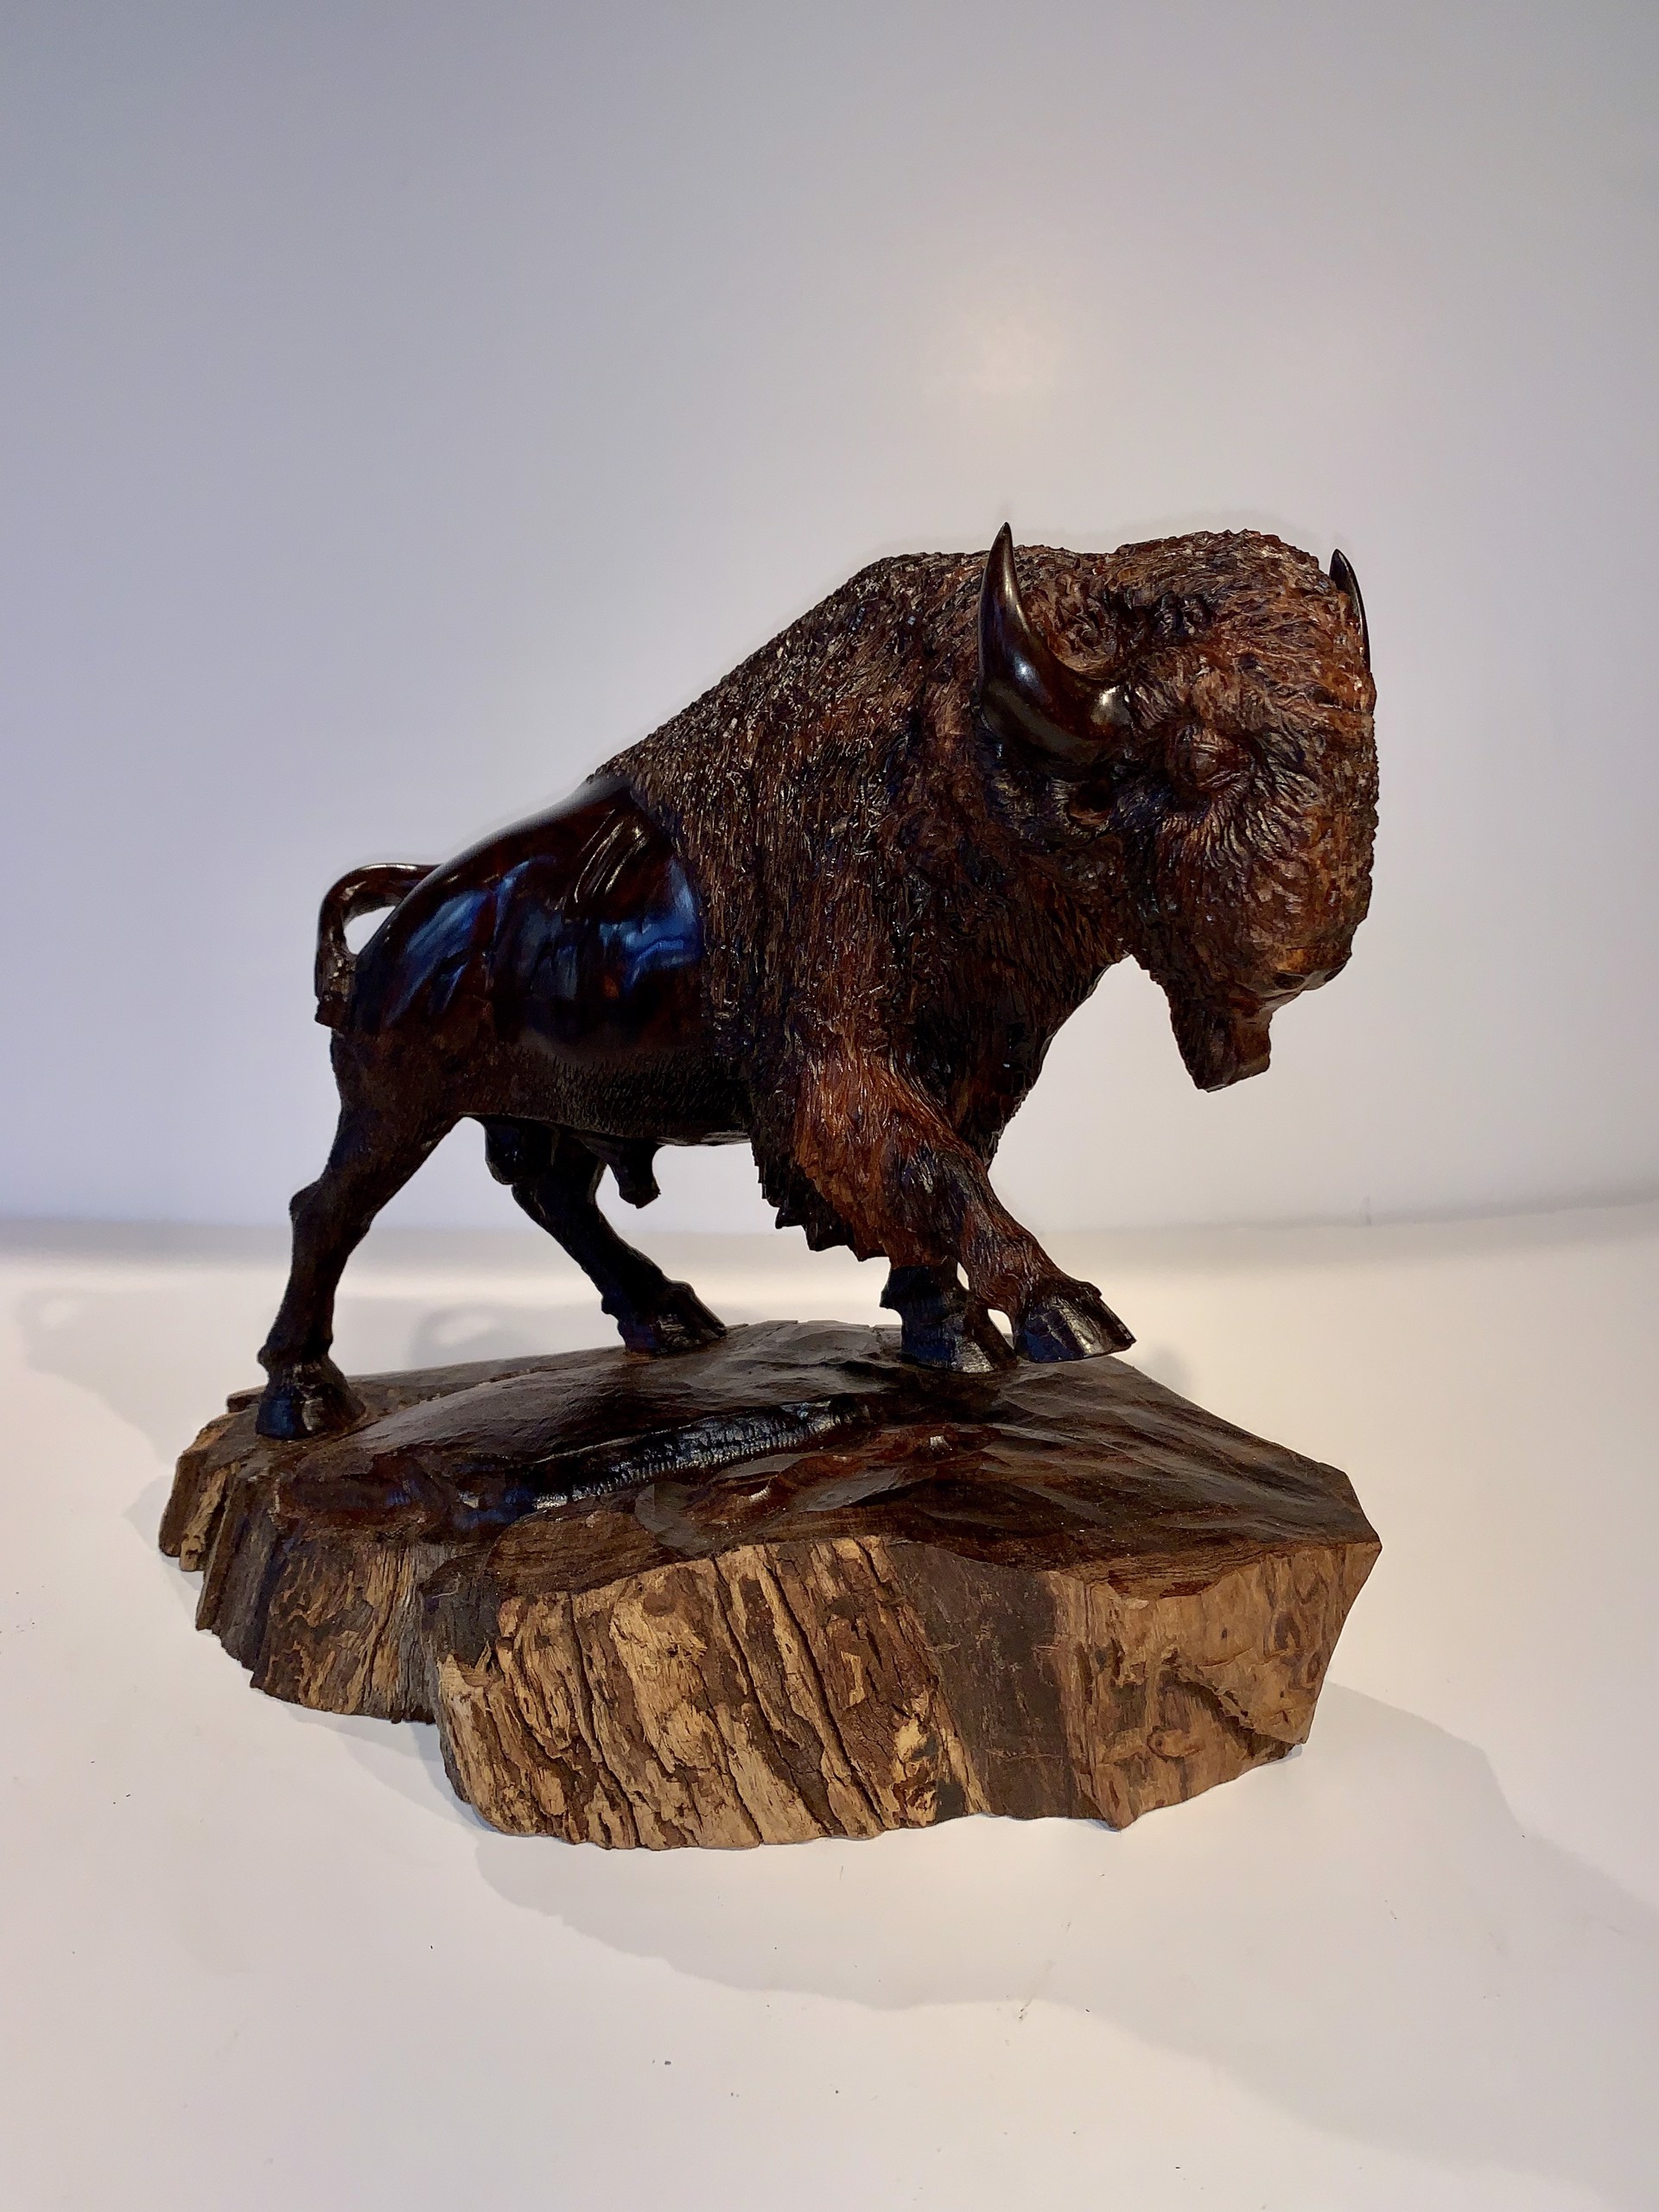 Bison with right foot up by Thomas Suby